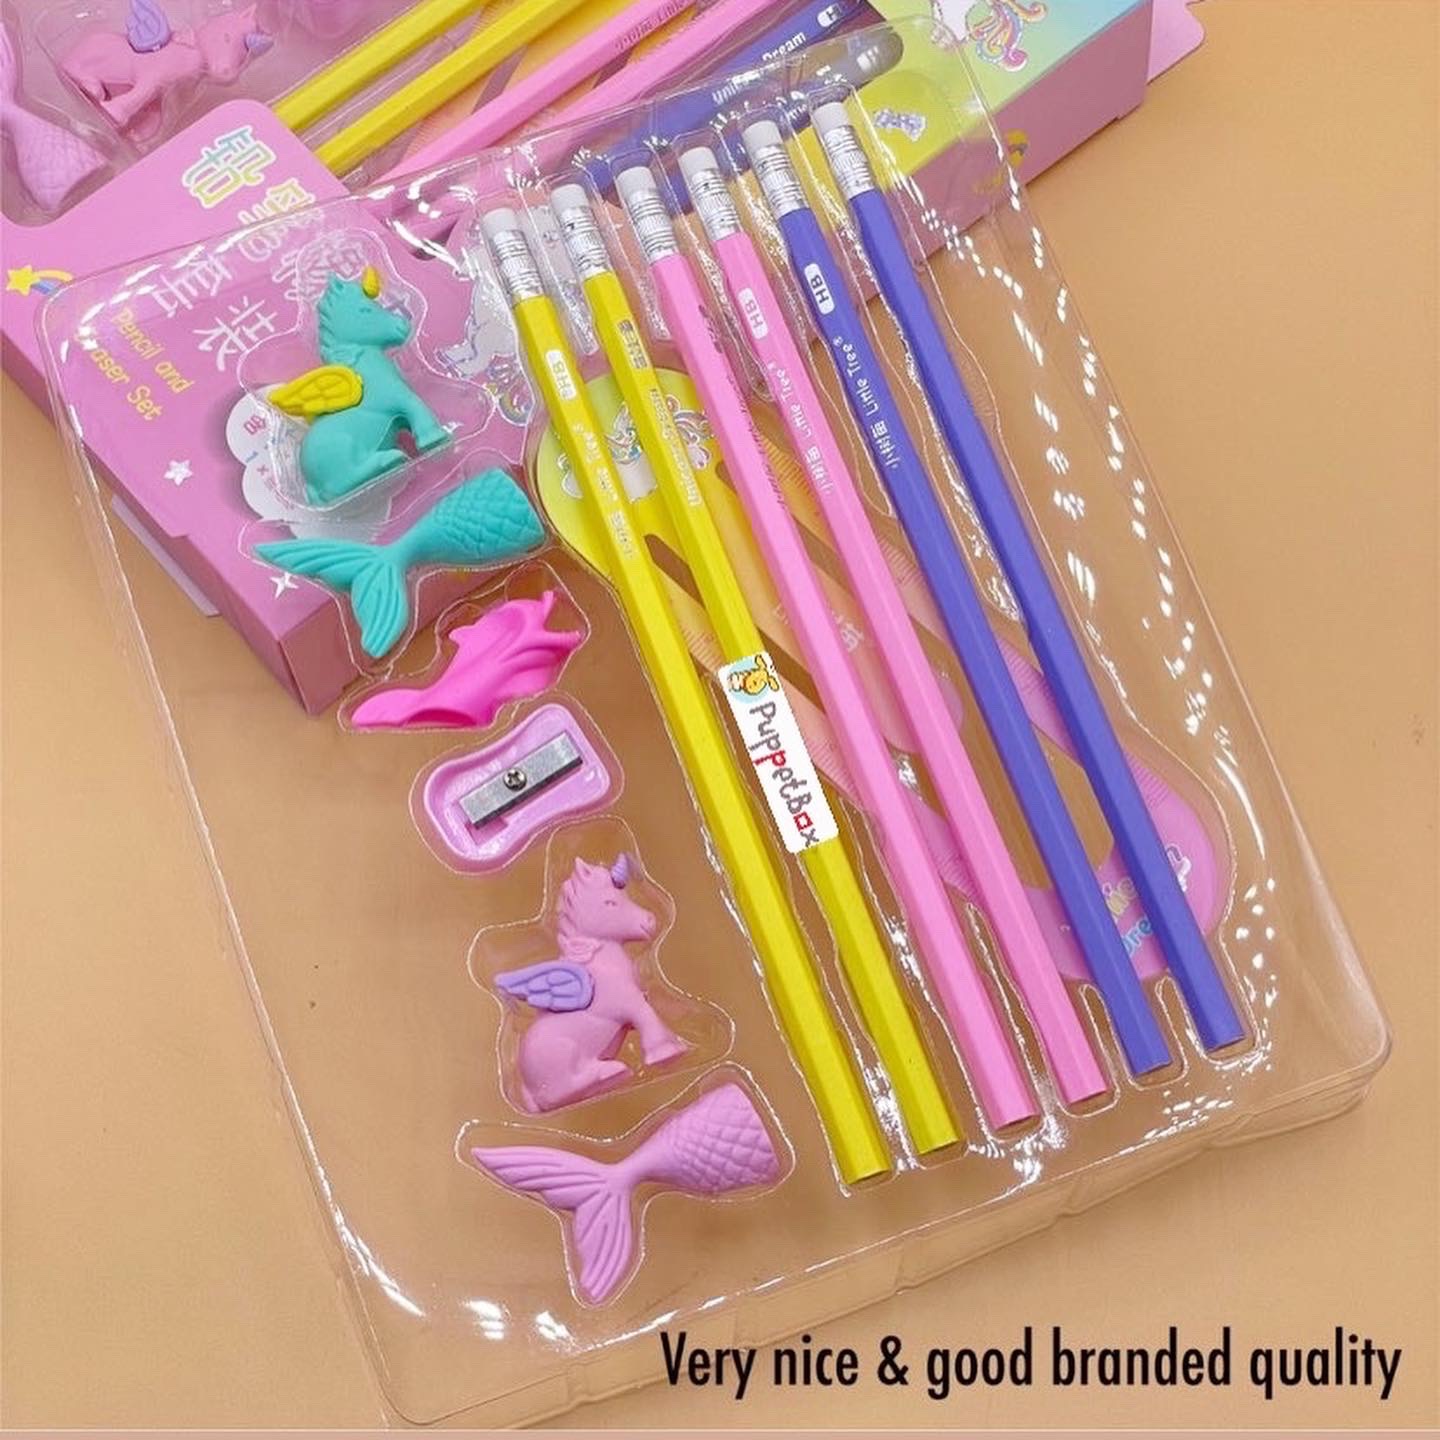 36 Pieces Valentines Pencils with Heart Shape Erasers Toppers Decorated Colorful Pencils Erasers Valentines Day Pencils Stationary Set for Valentines Party Office School Supplies Students Presents 